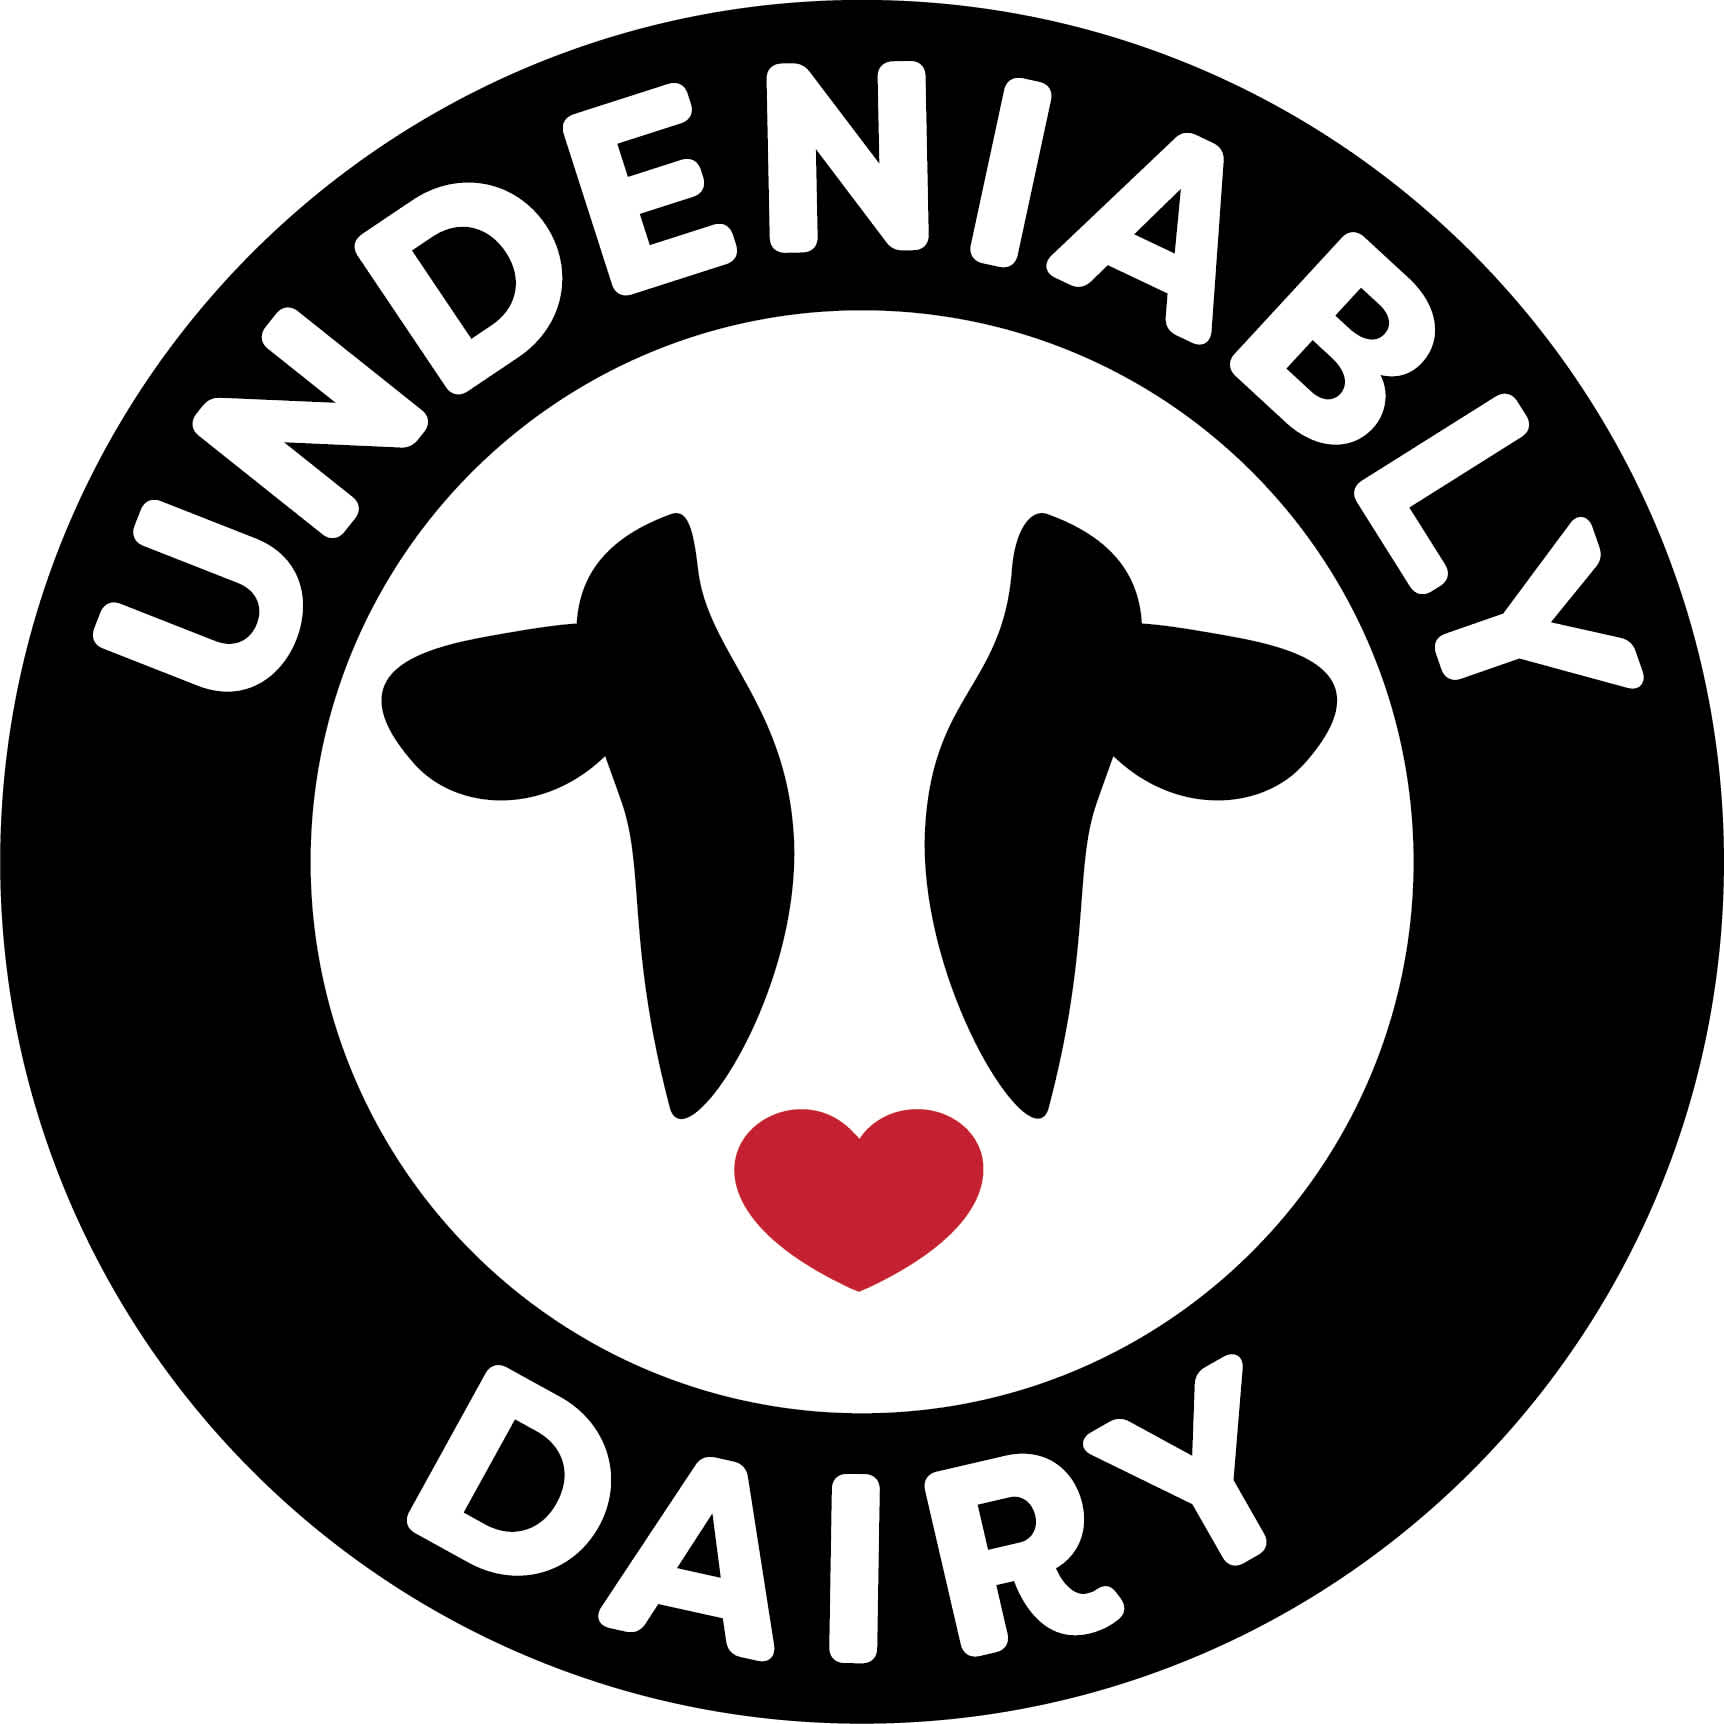 Cow icon that reads "Undeniably Dairy"